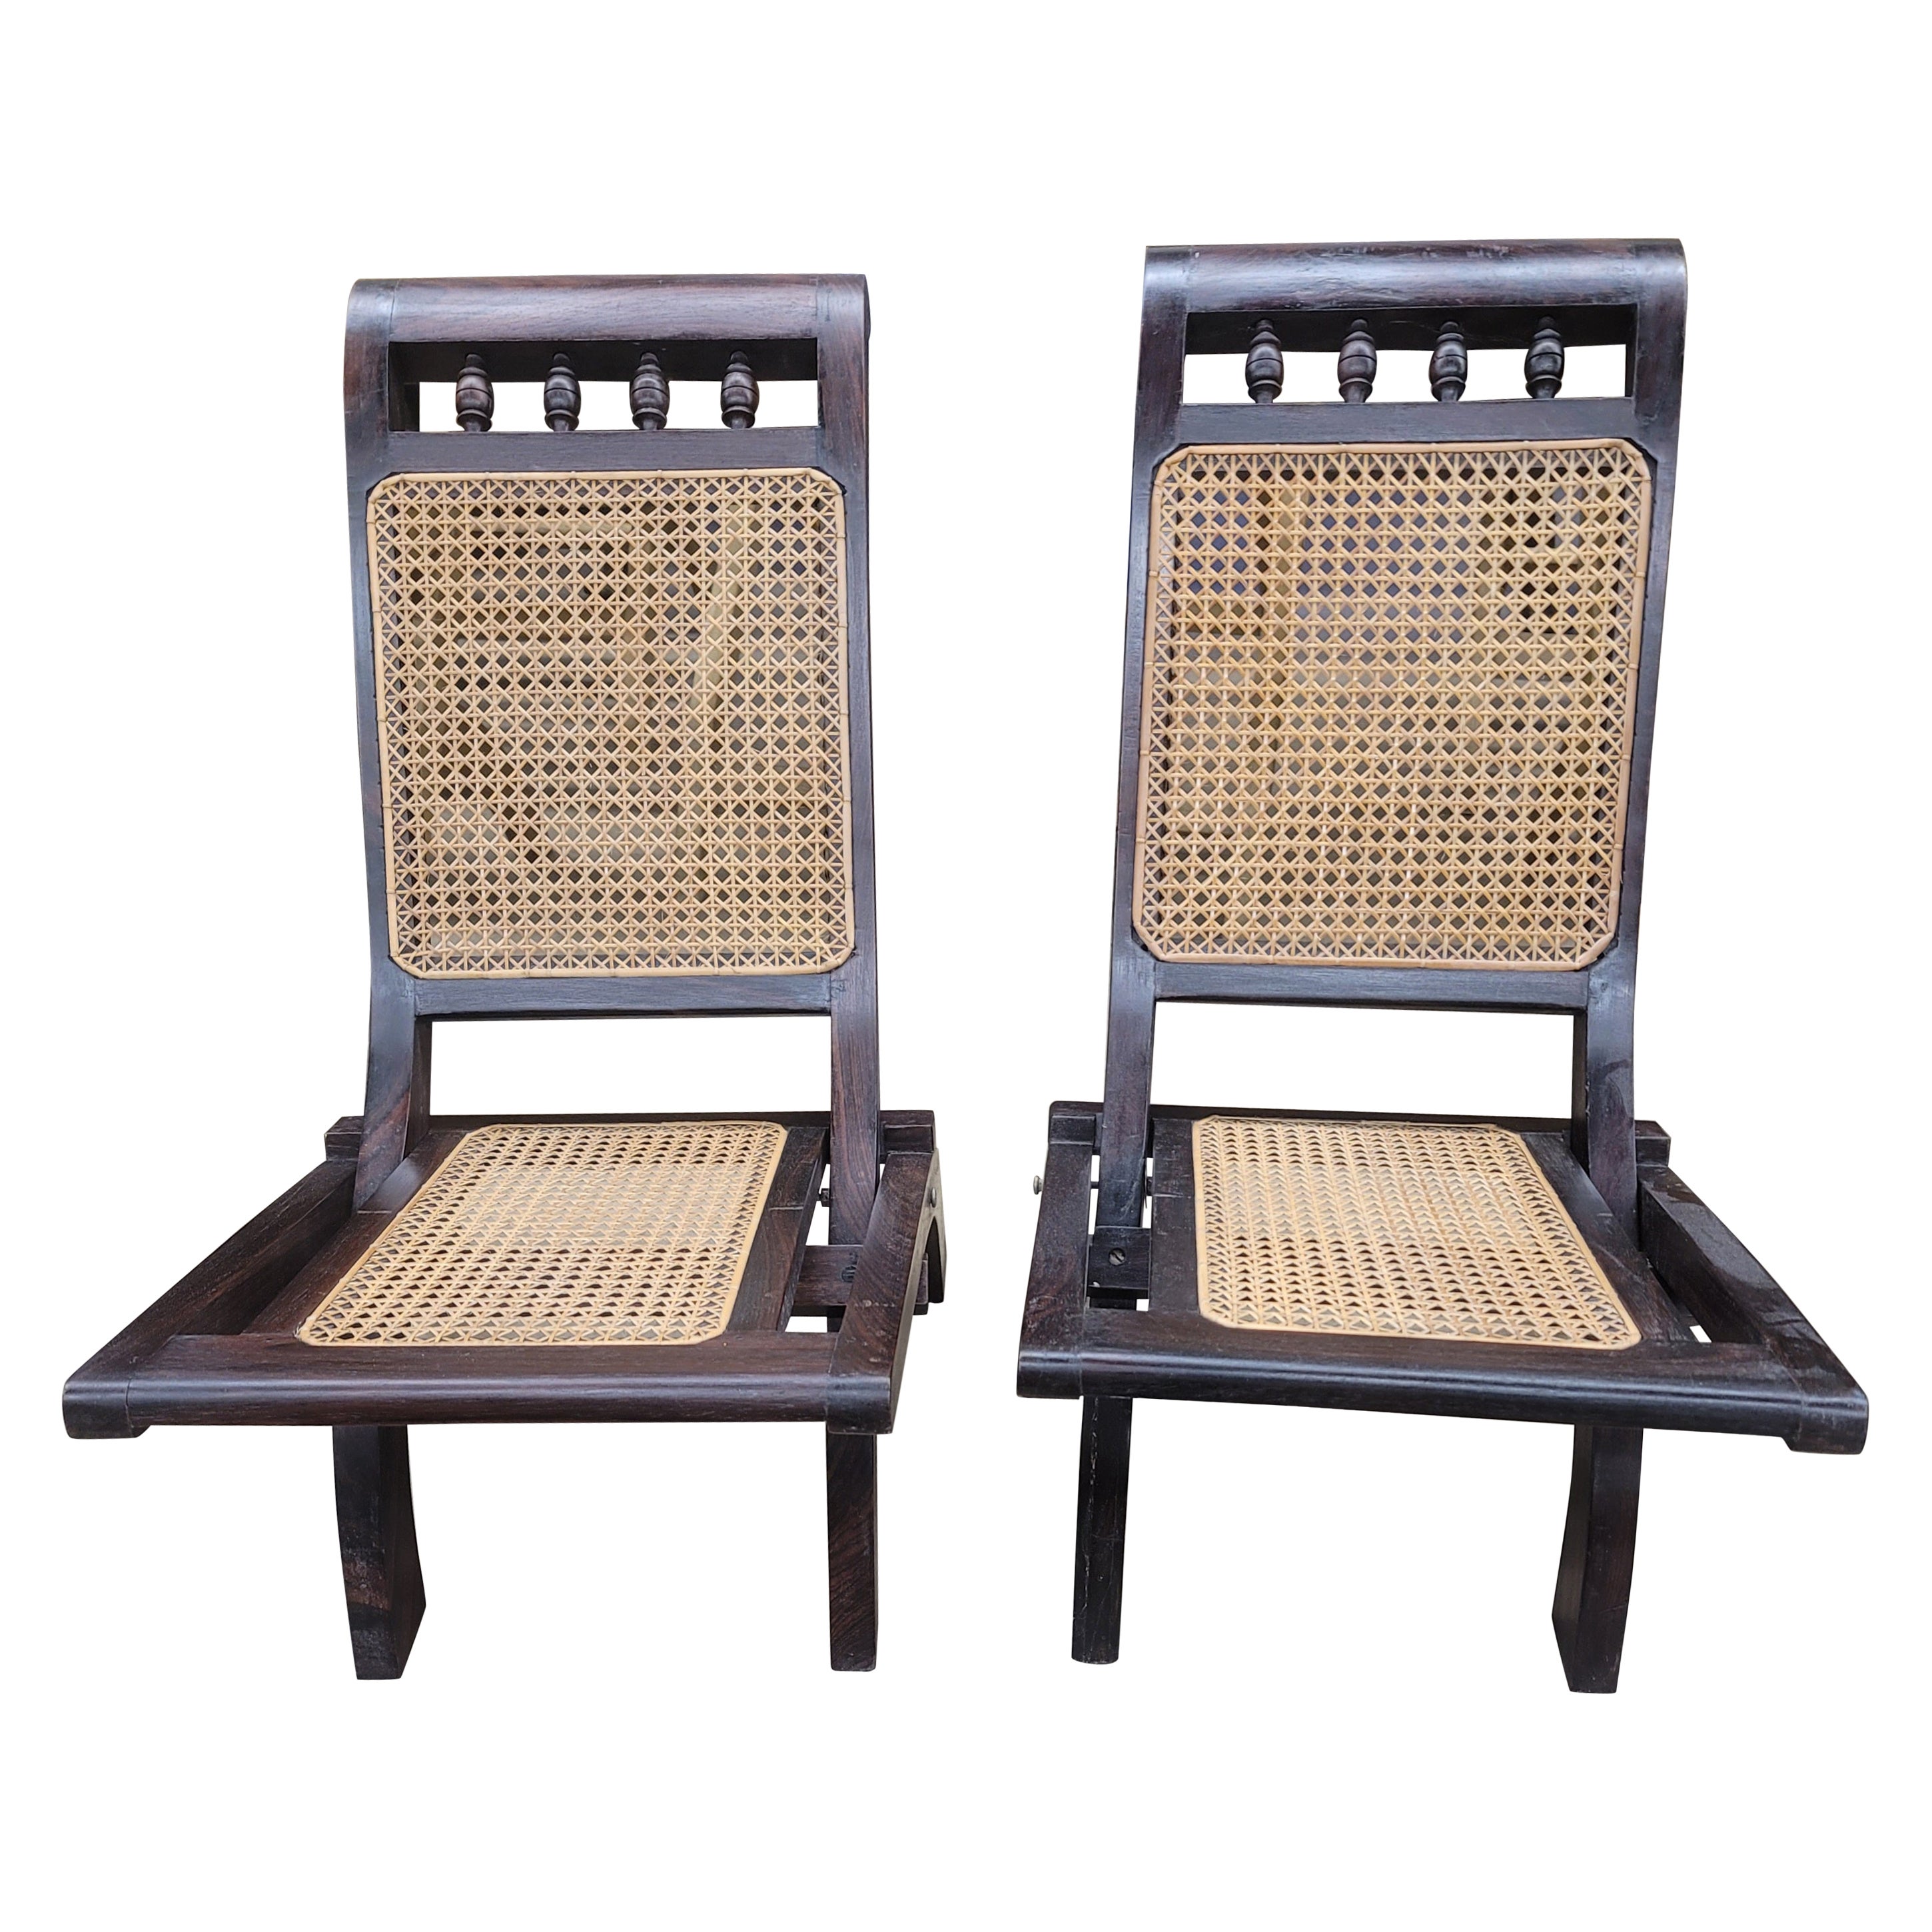 1920s, Pair of Rosewood Cane Seat Folding Lounge Chairs